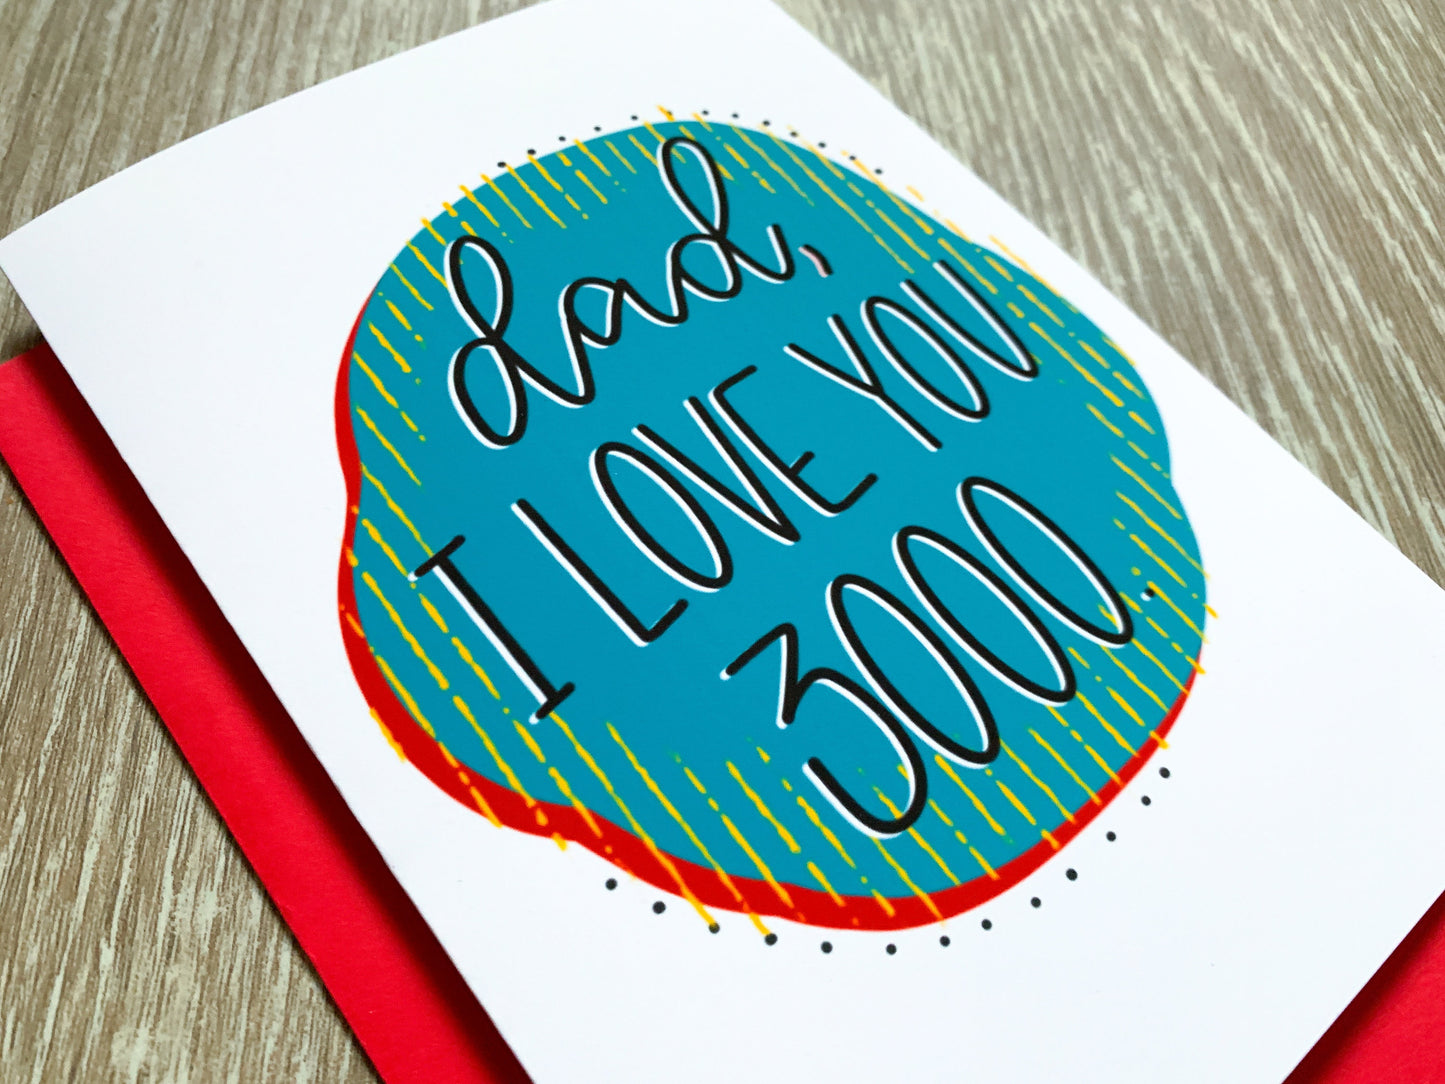 Marvel Inspired Father's Day Card Love You 3000 by StoneDonut Design